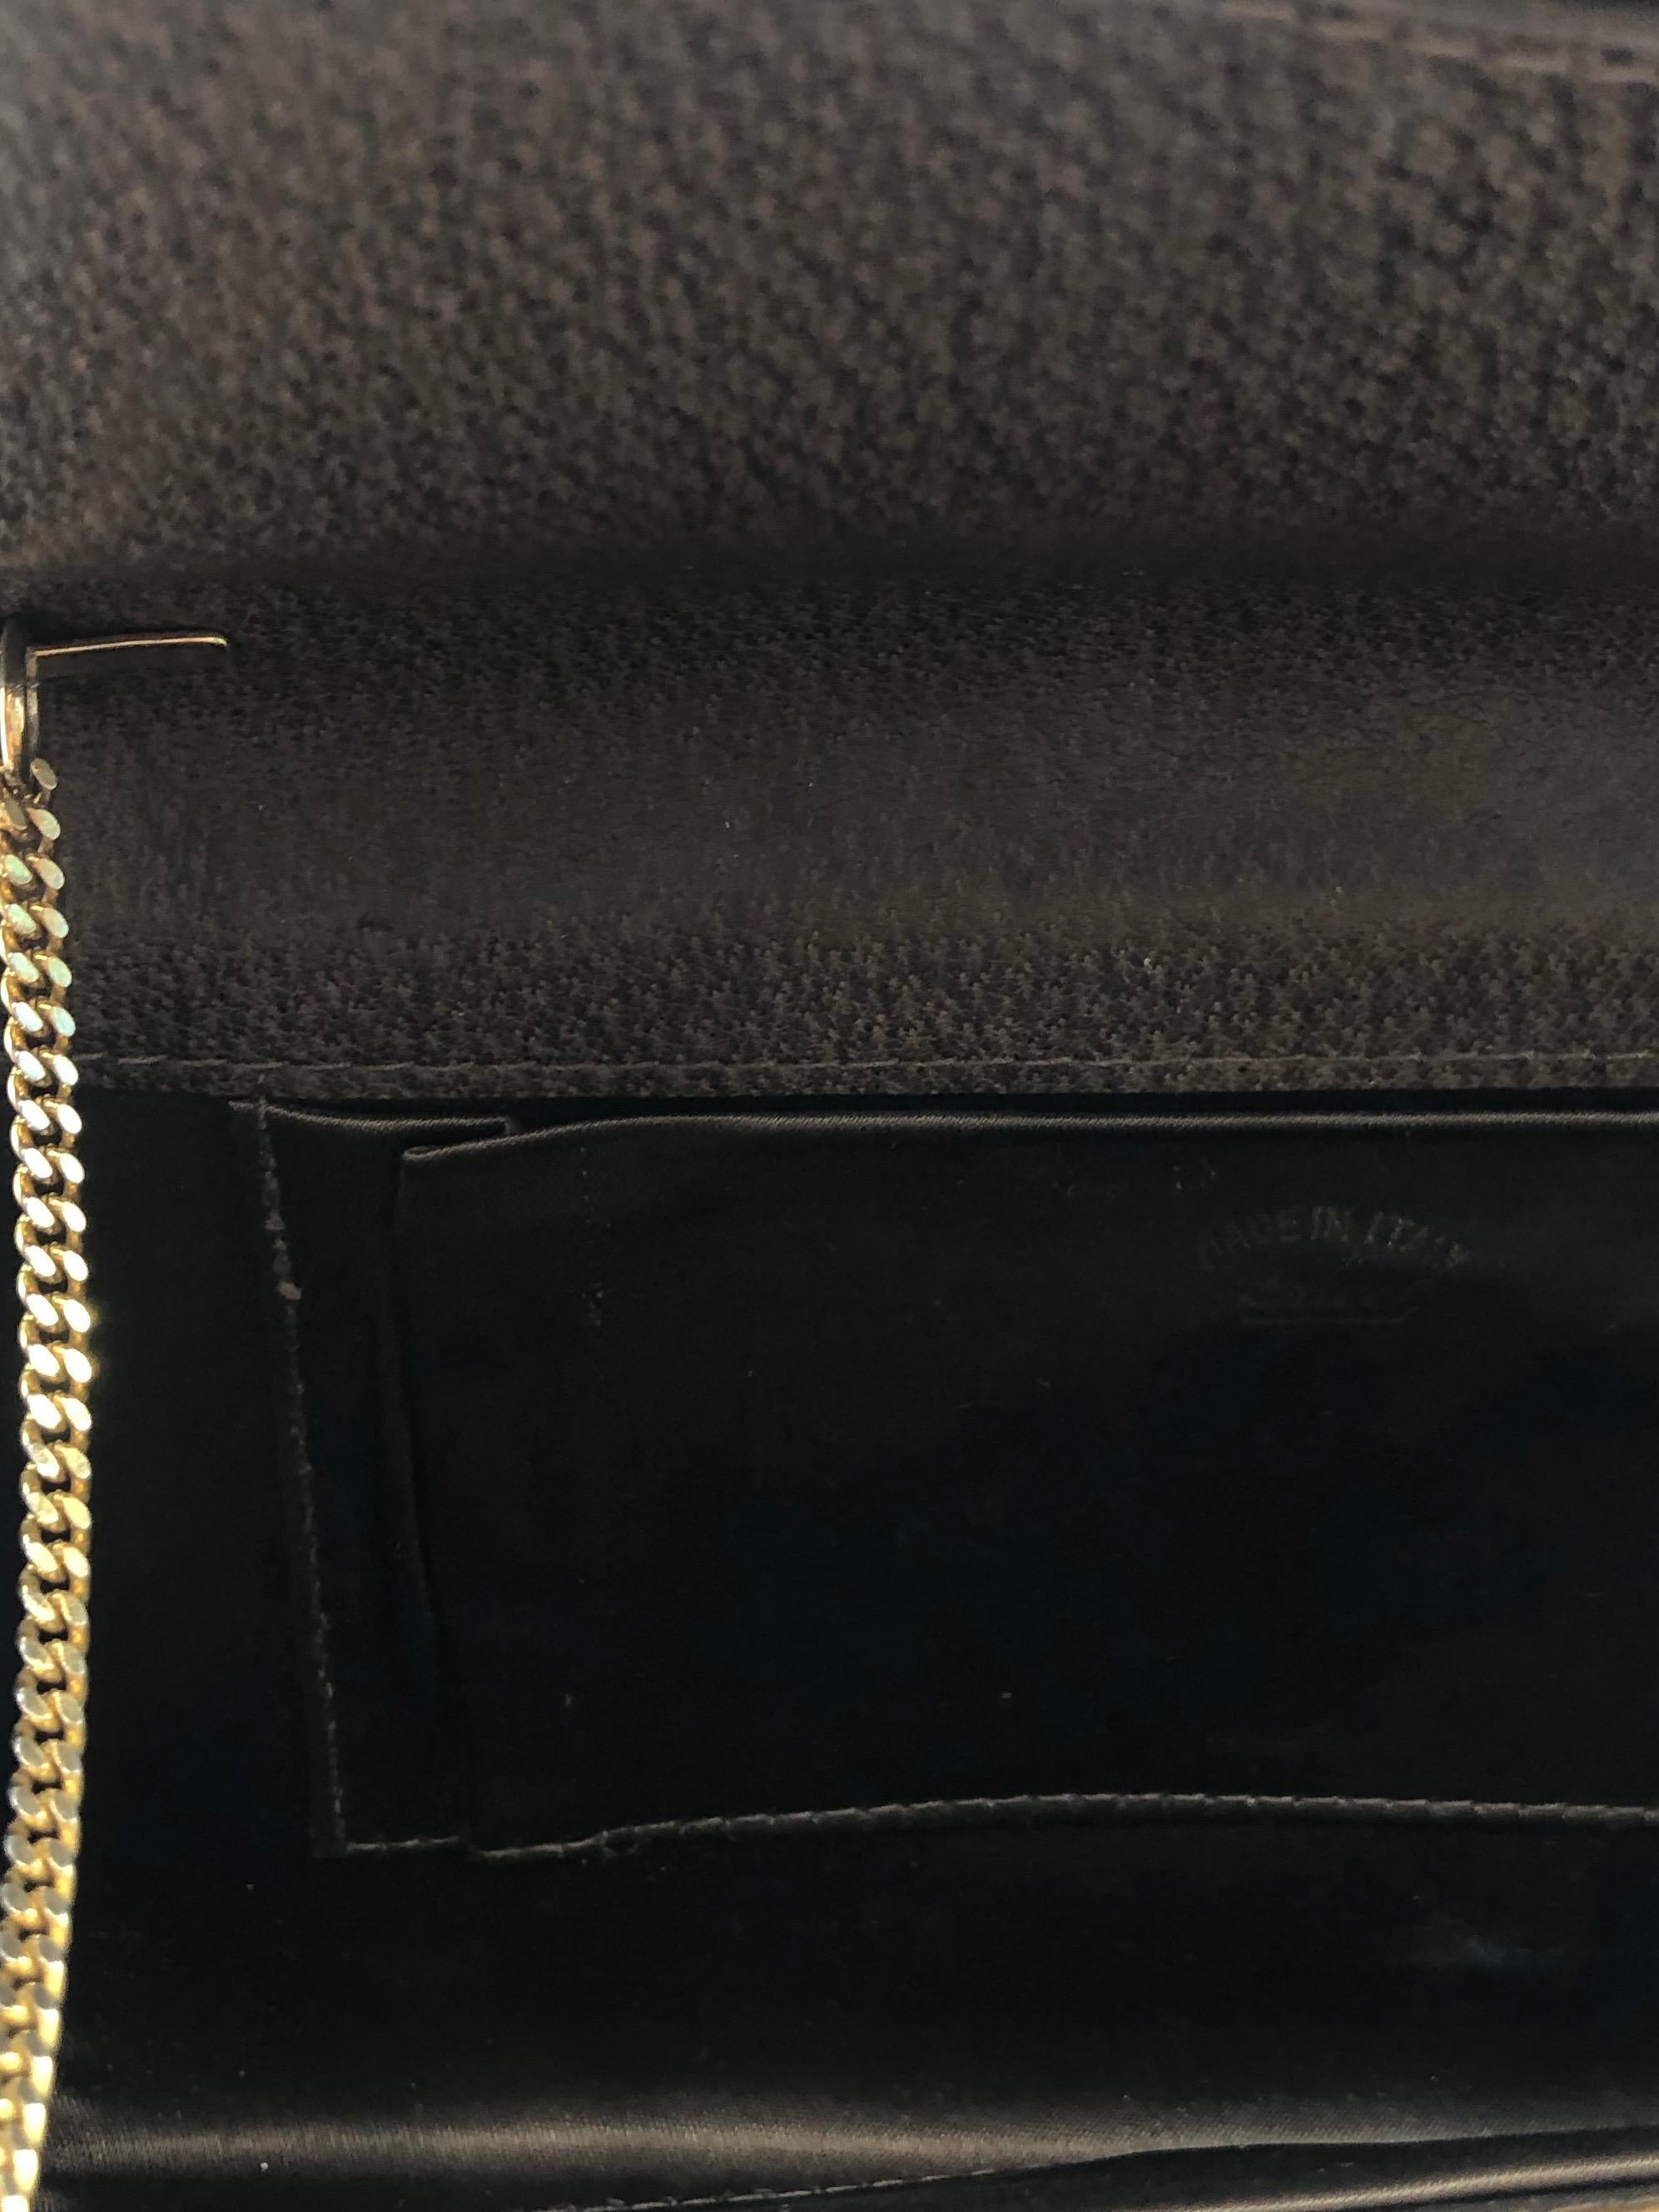 Black Gucci Vintage GG Logo Crossbody Bag with Gold Chain